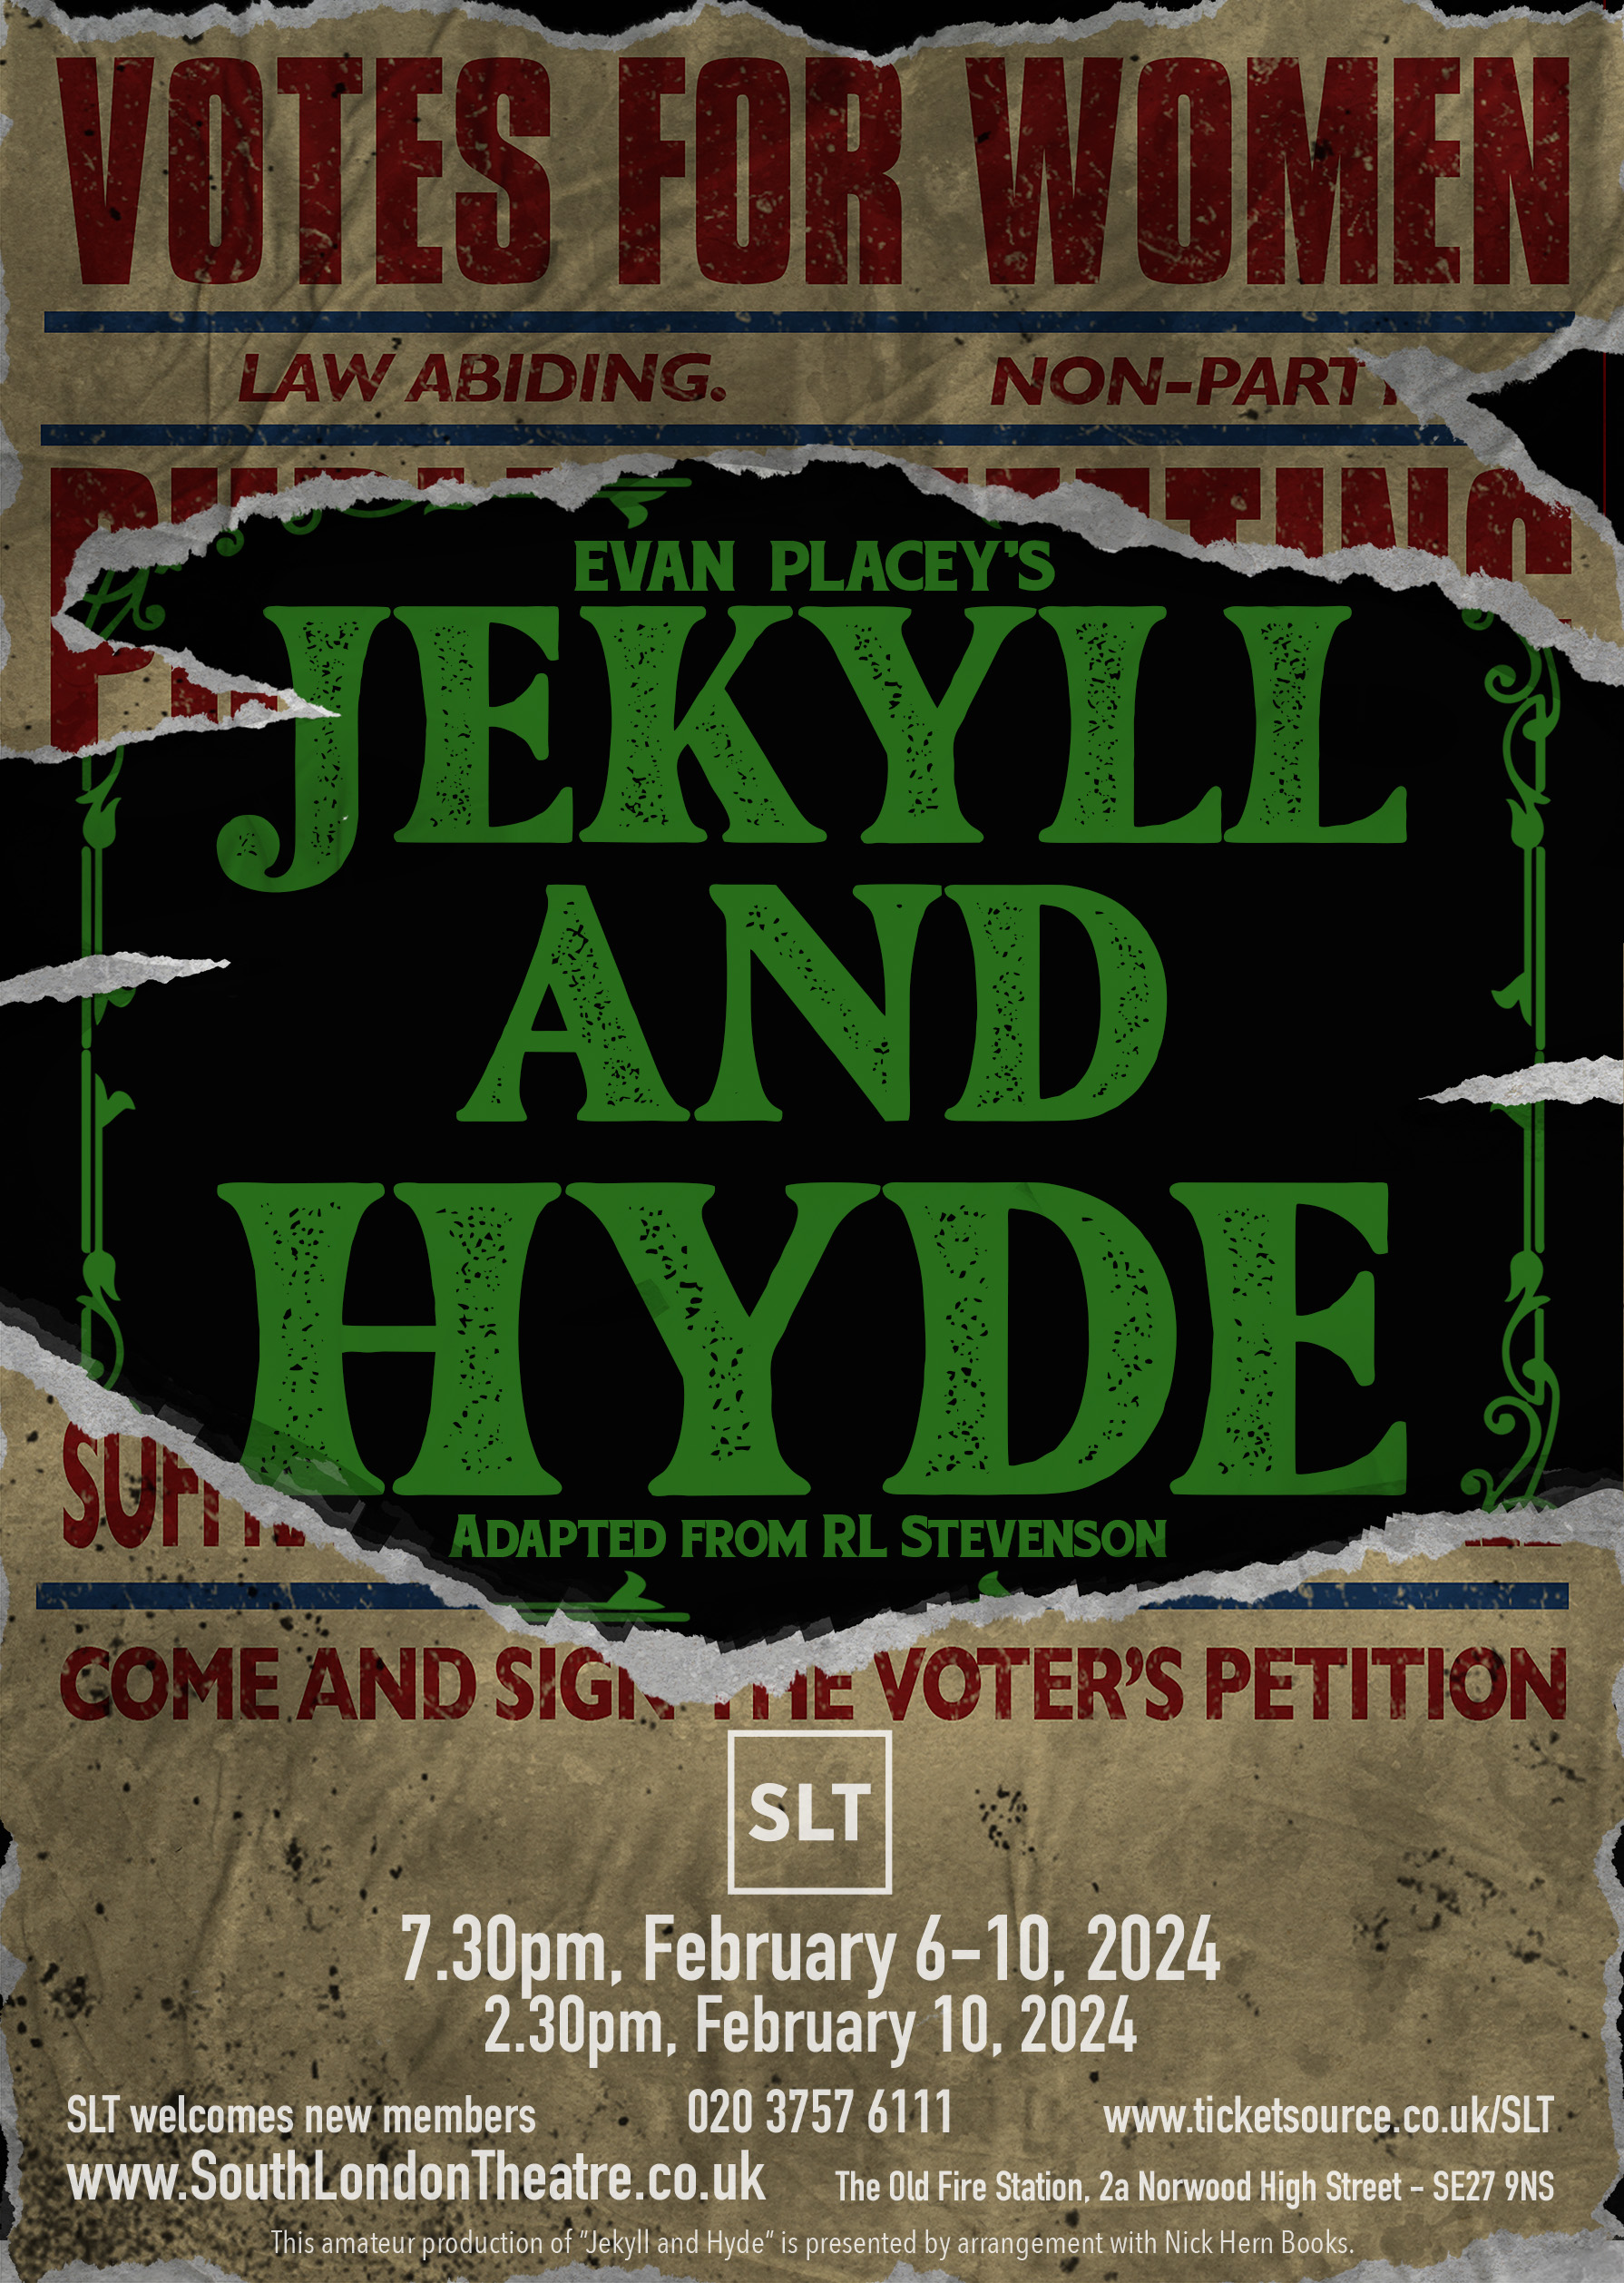 A poster showing Jekyll and Hyde on a ripped poster for women's rights